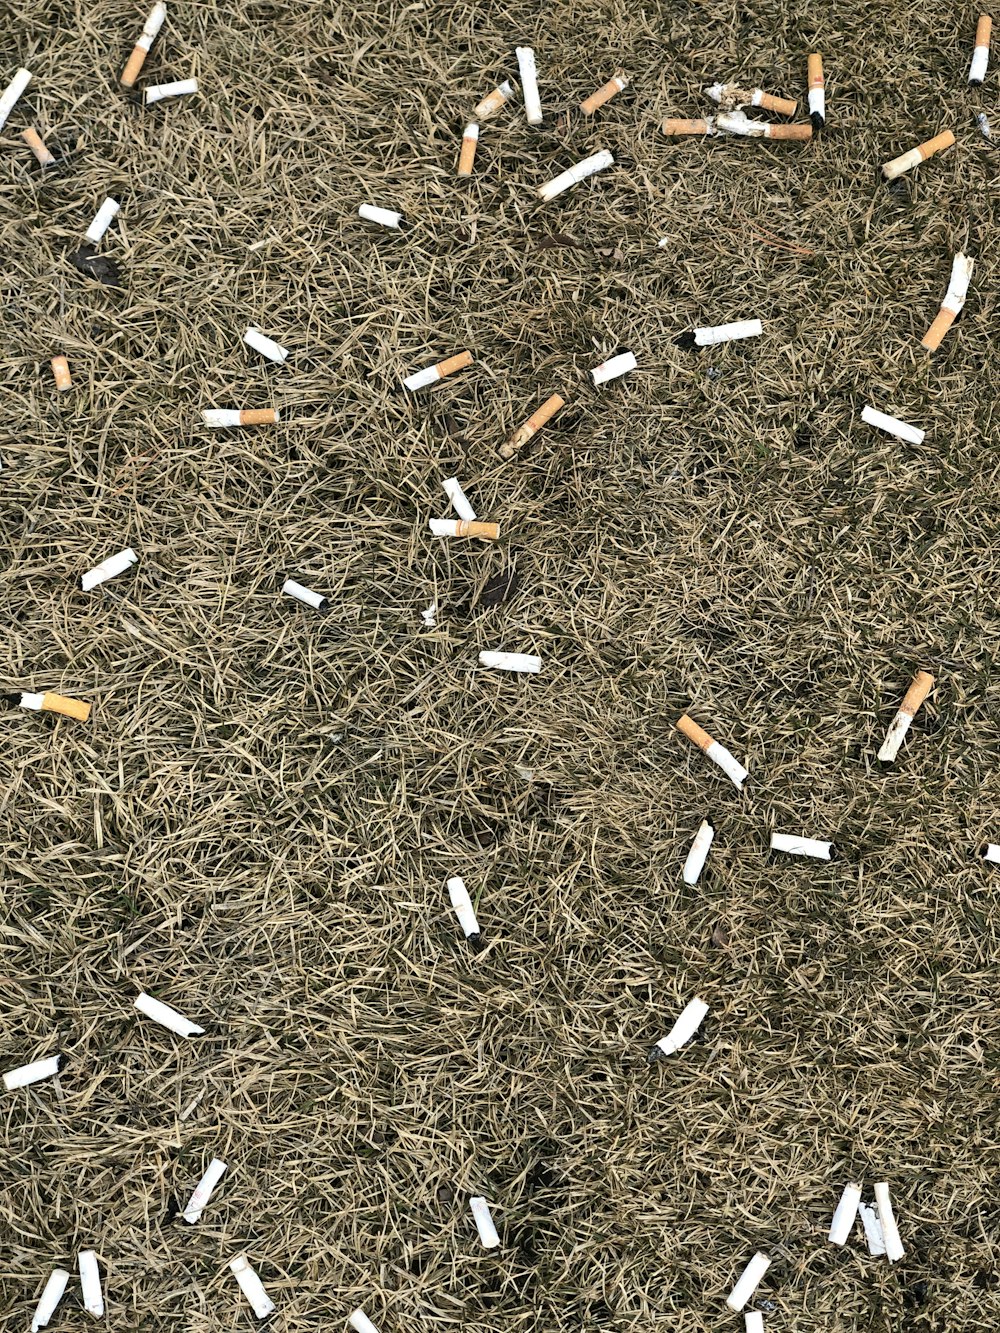 cigarette butts scattered around the grass